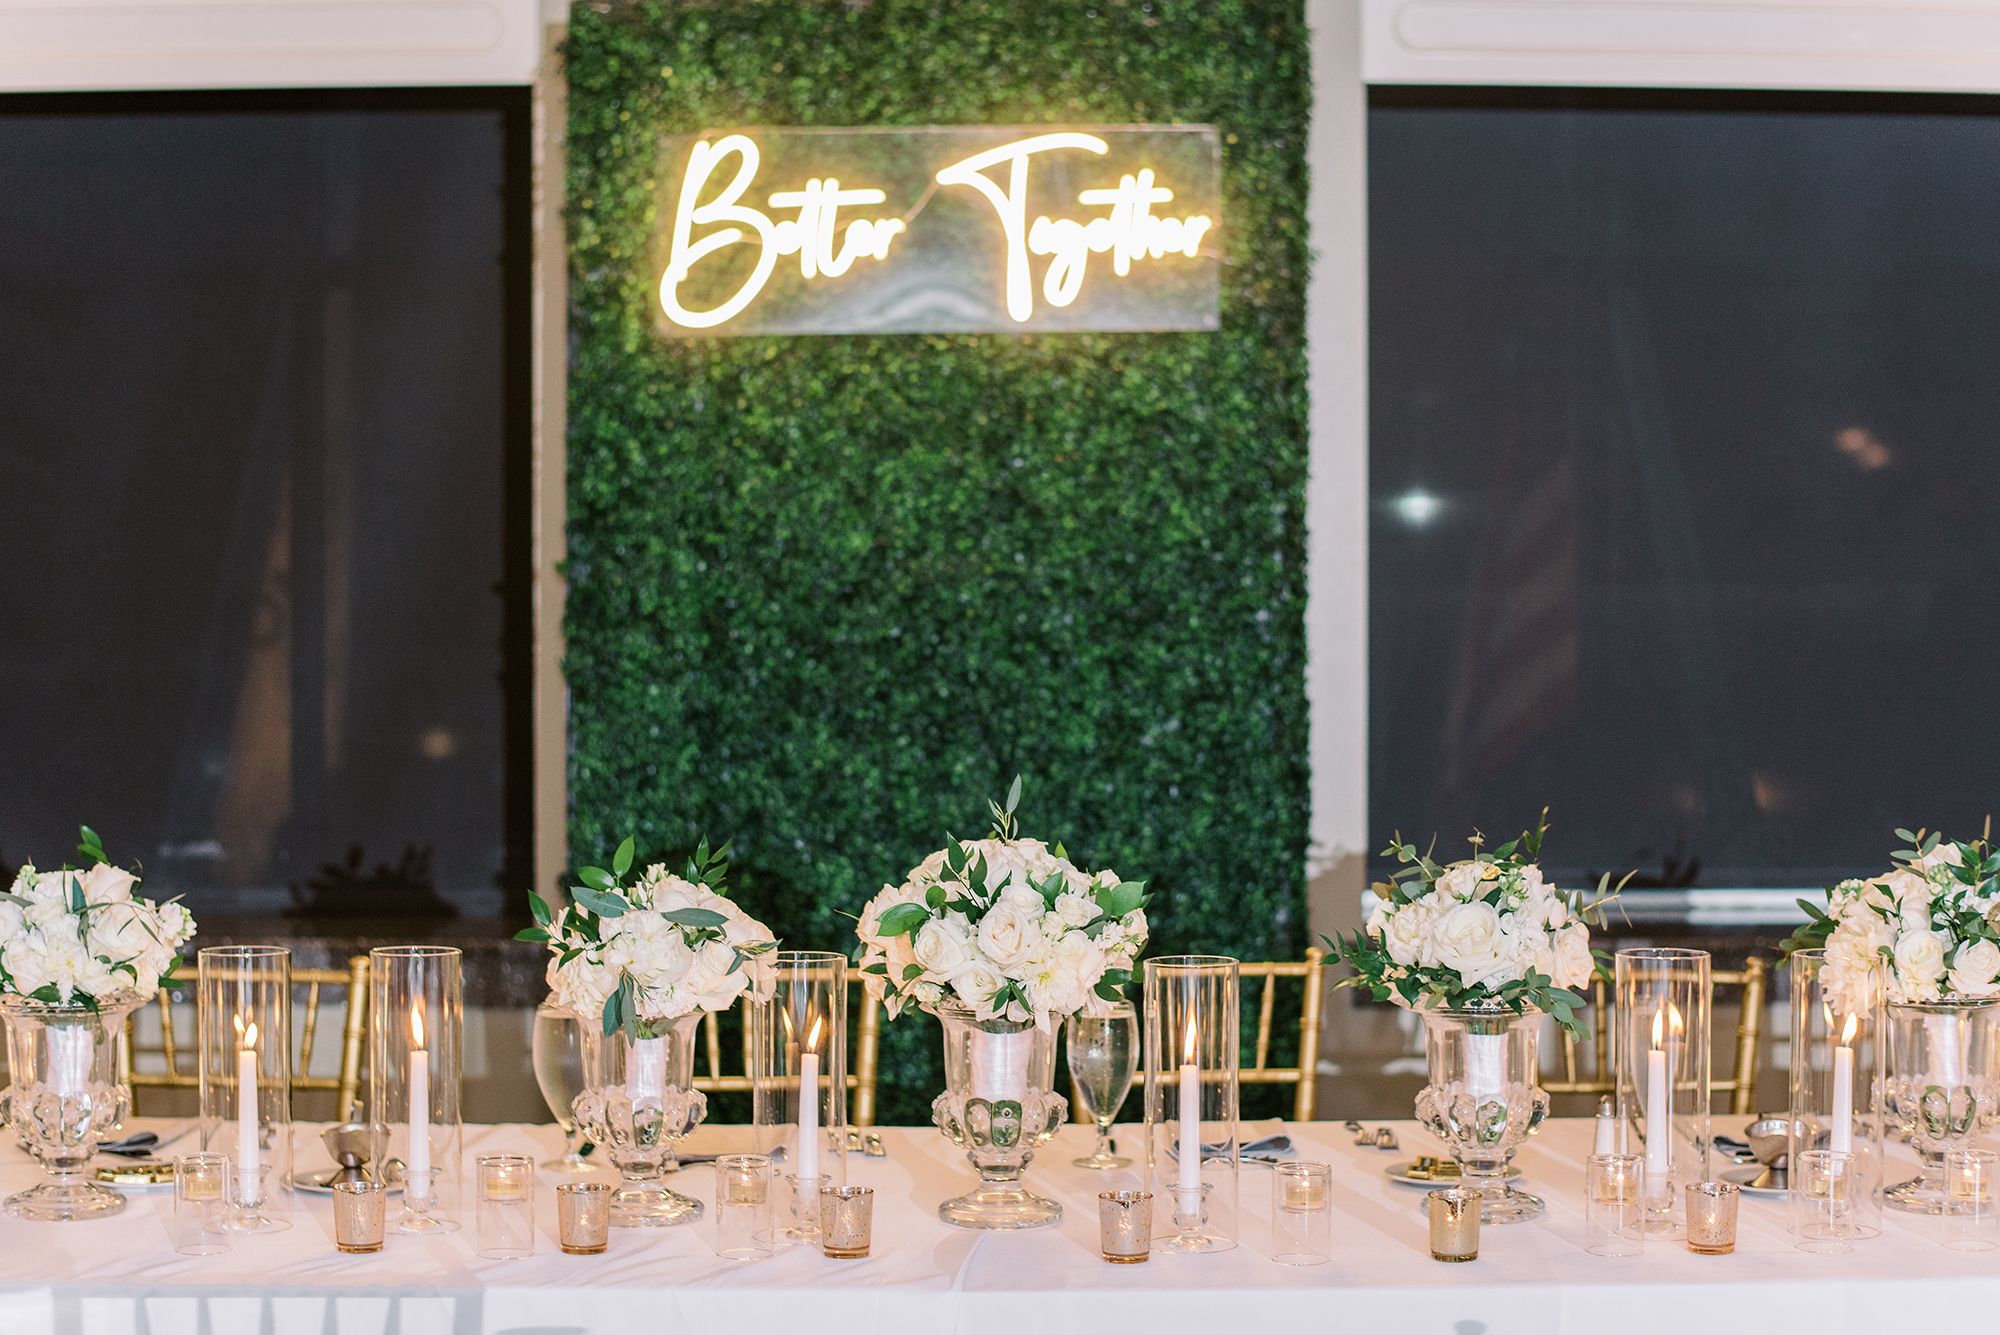 The bride and groom's table is decorated with floral centerpieces with white flowers. The backdrop is an ivy wall with a neon sign that says "Better Together."